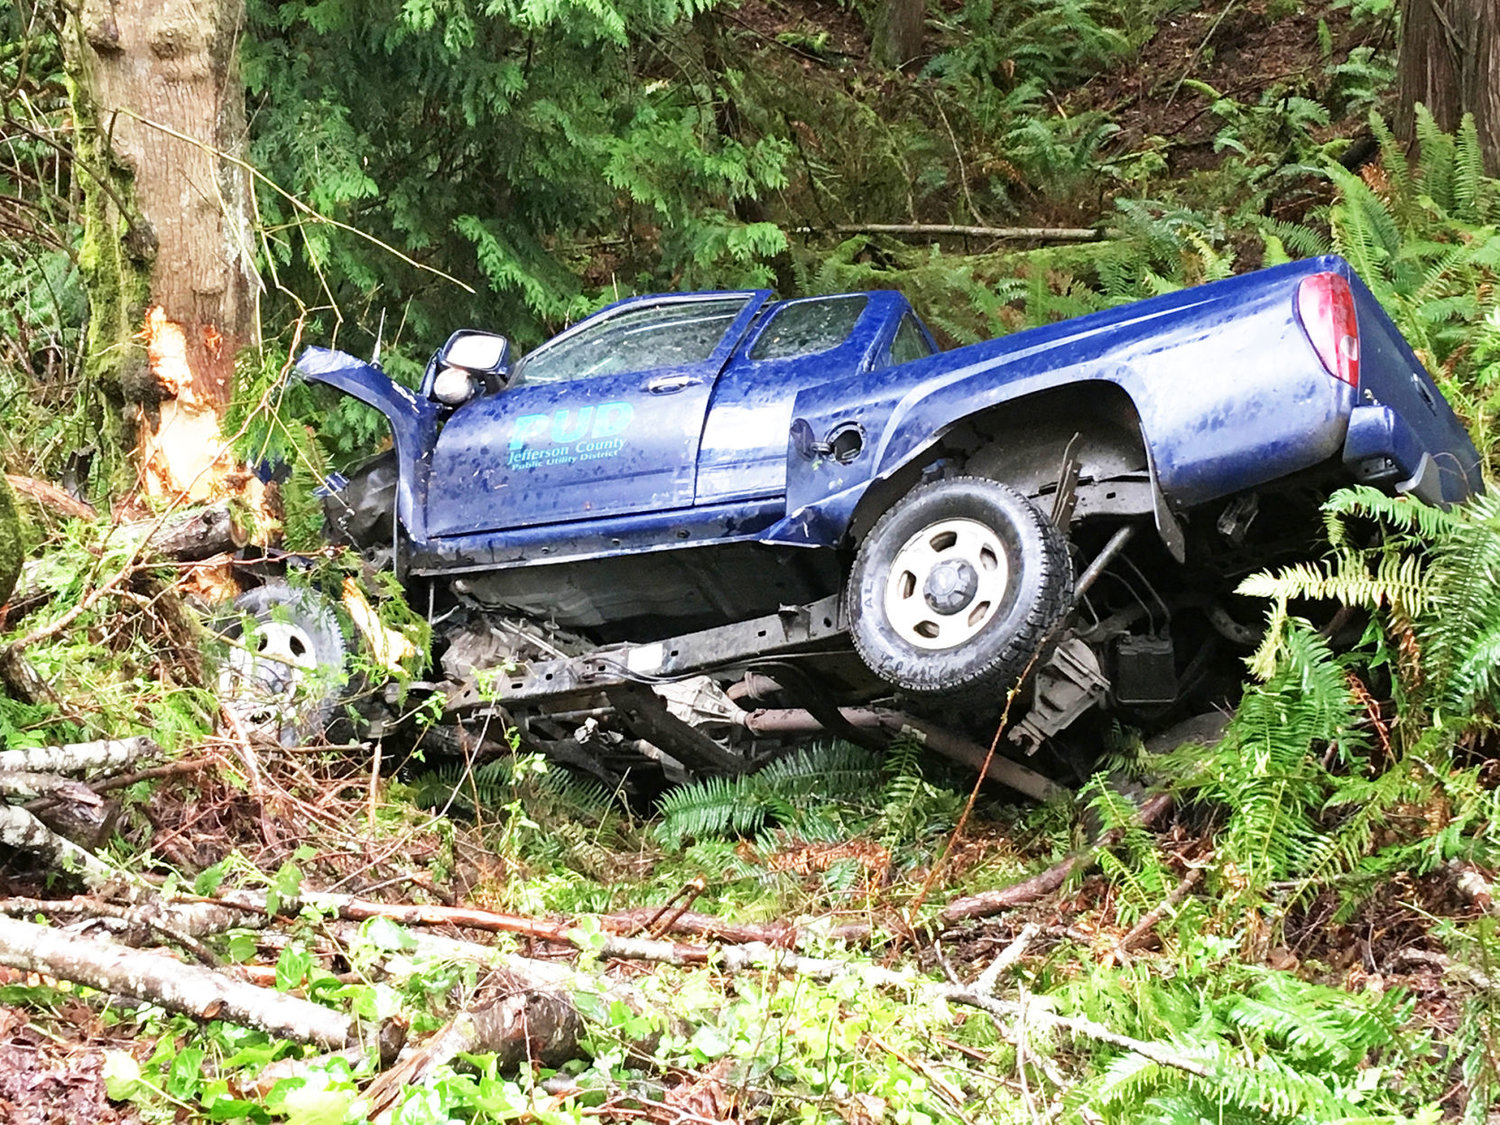 RIGHT: A truck driven by a 72-year-old Jefferson County Public Utility District employee is seen to the left in a ravine off State Route 20. The man died April 16 when the vehicle he was driving drifted off the highway and struck a guardrail, then traveled down an embankment.